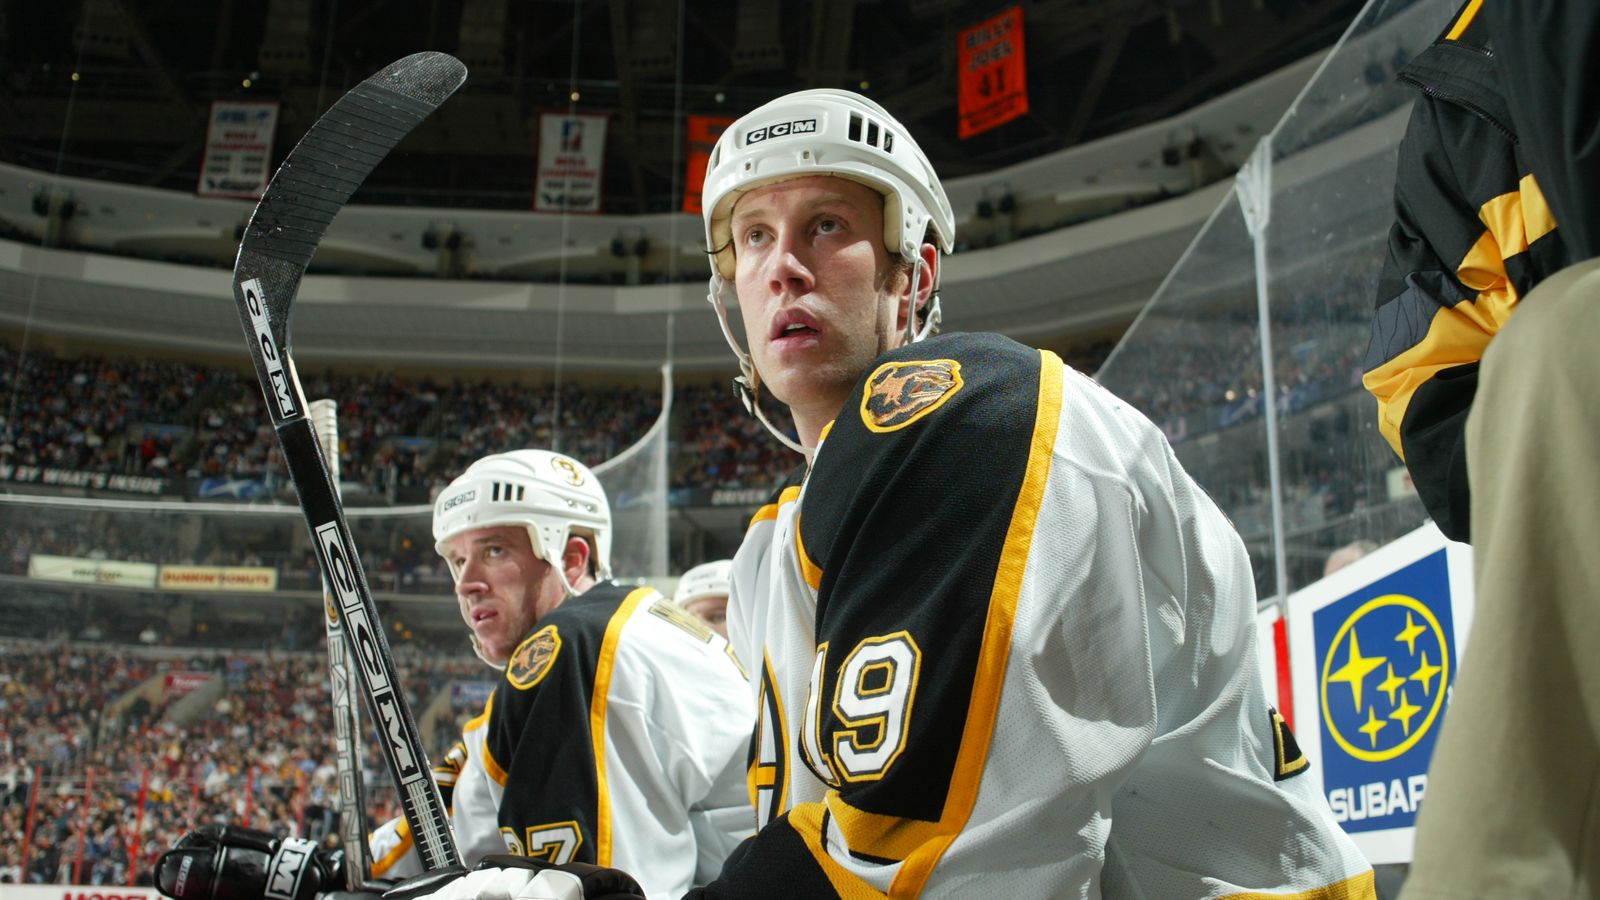 OTD in NHL history! Jumbo Joe Thornton was traded from the Bruins to the  Sharks in 2005 : r/nhl